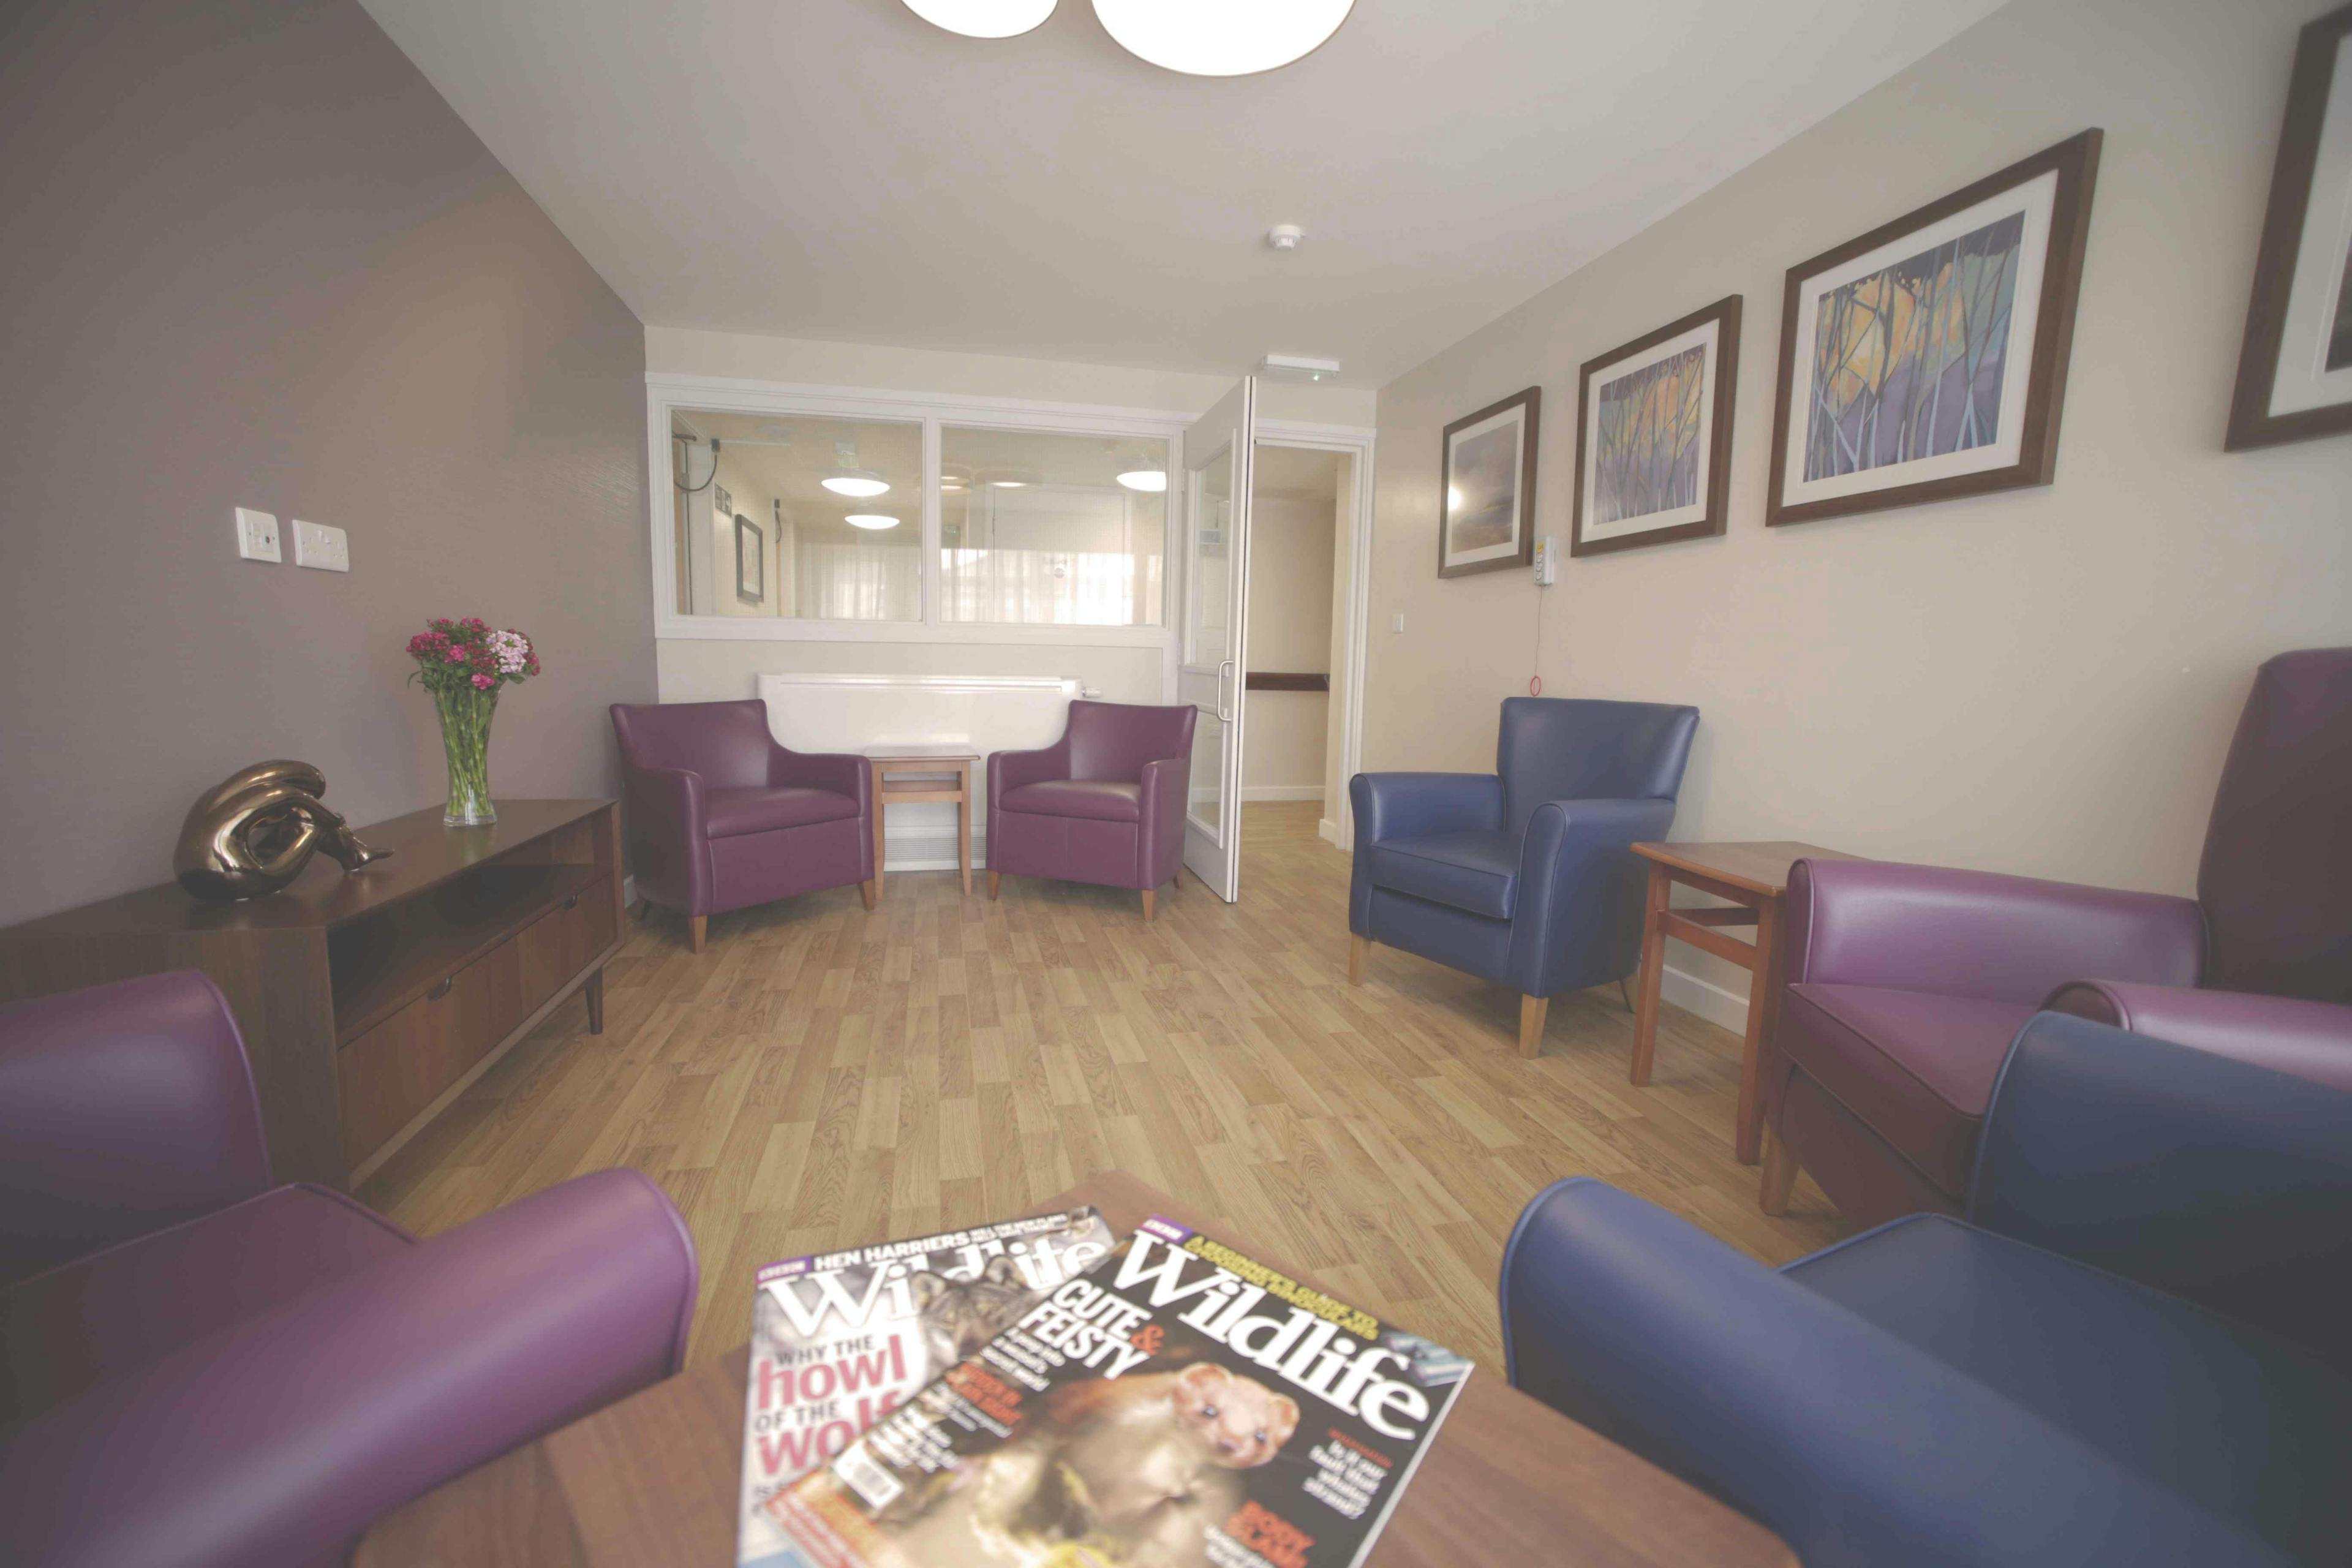 Minster Care Group - Turnpike Court care home 5